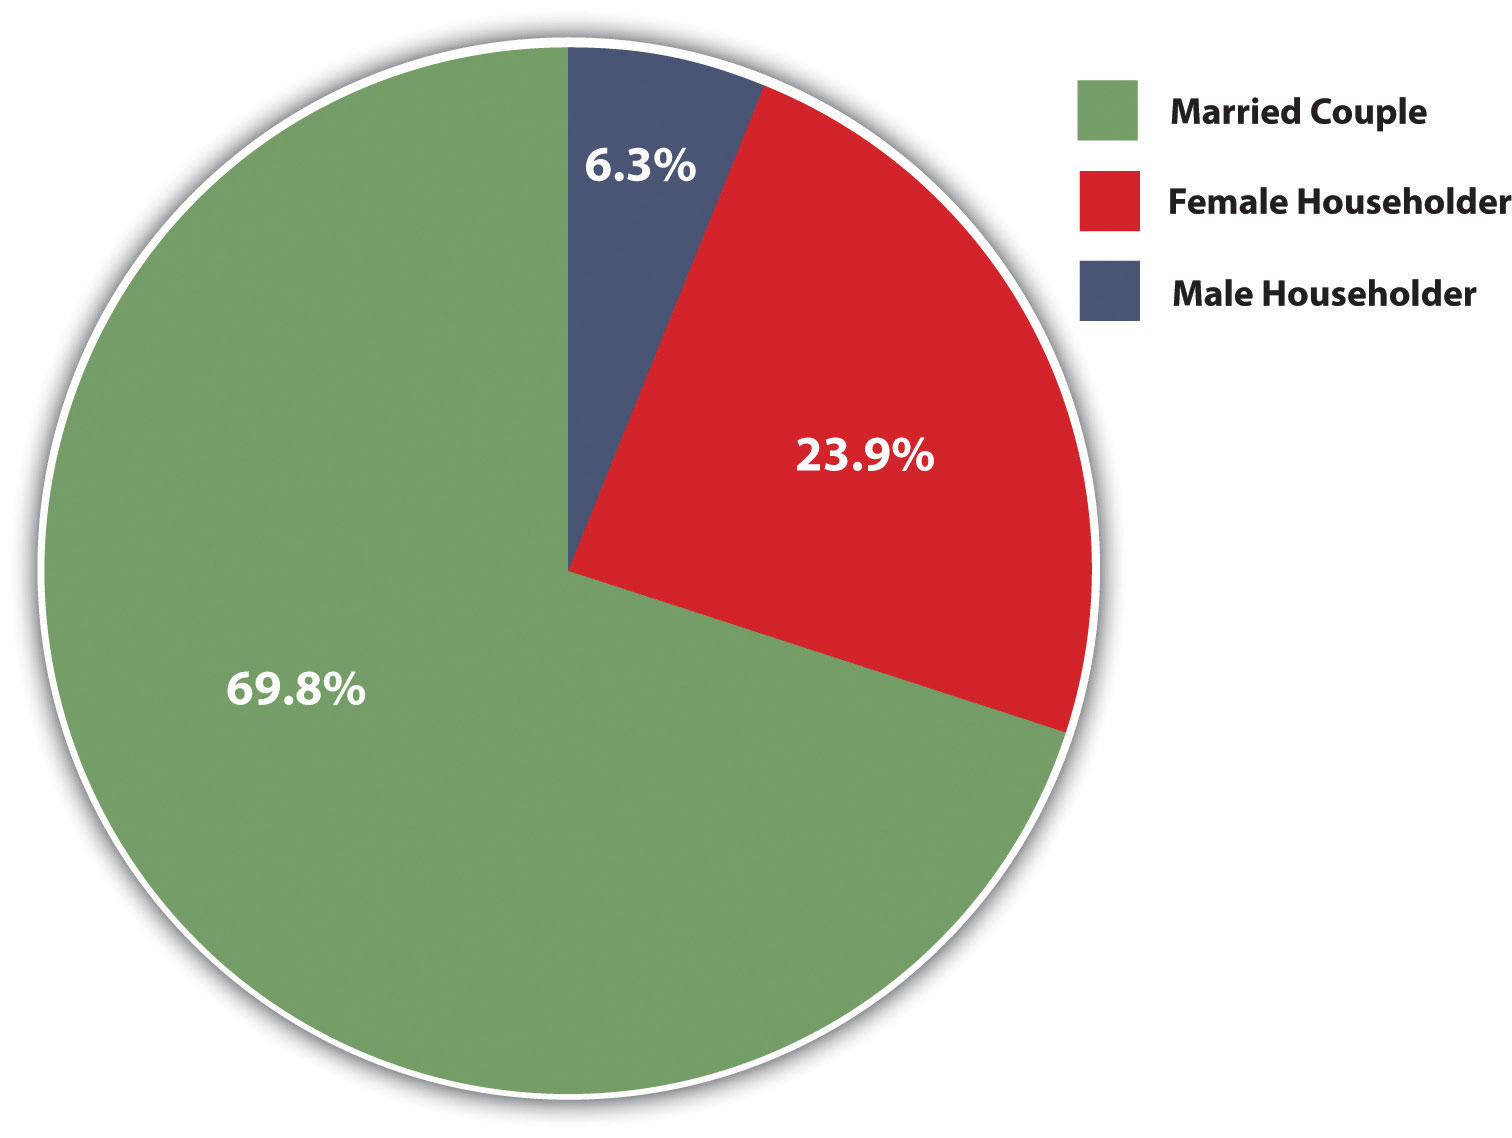 Pie chart of Family Households with Children under 18 Years of Age: 69.8% are a married couple, 23.9% is a female householder, and 6.3% is a male householder